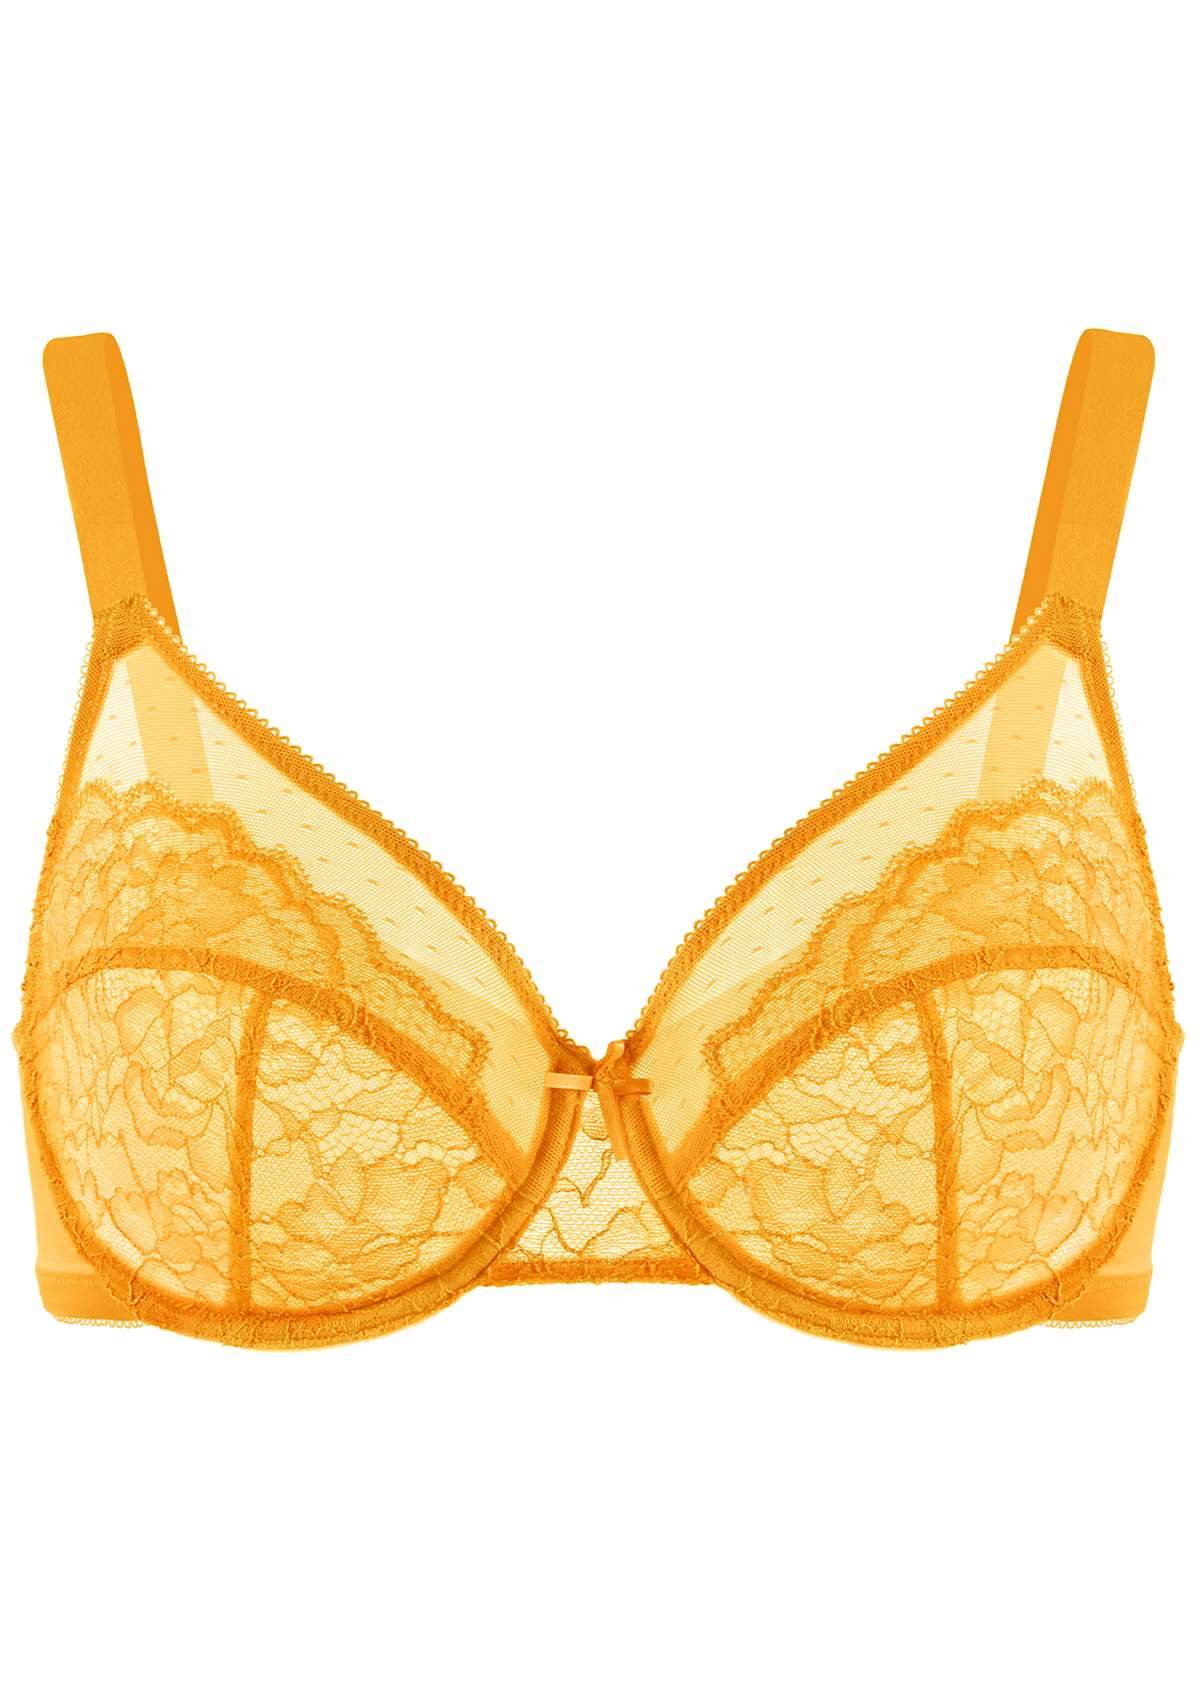 HSIA Enchante Bra And Panty Sets: Unpadded Bra With Back Support - Cadmium Yellow / 40 / G